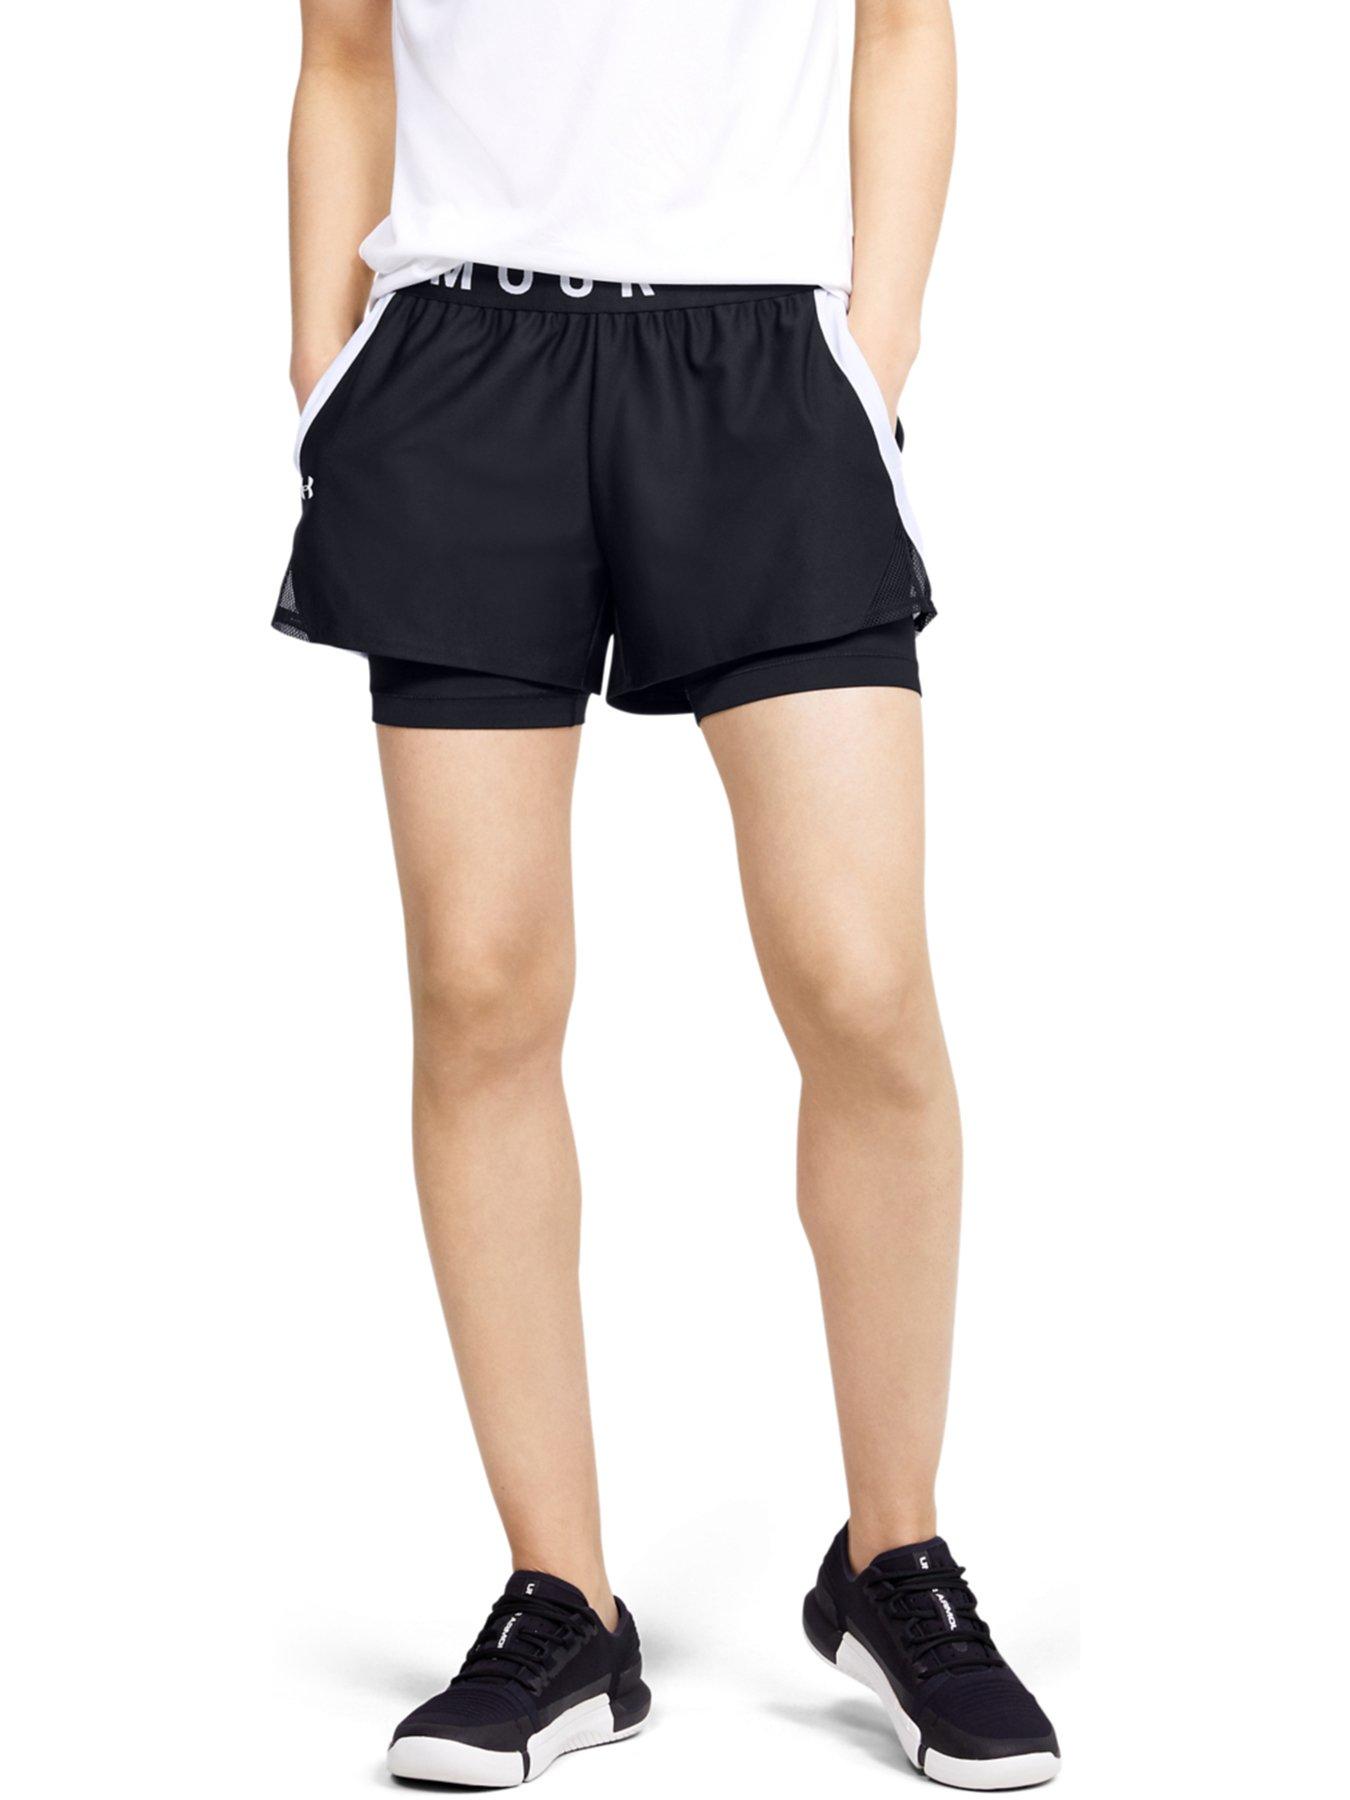 Women Play Up 2-in-1 Shorts - Black/White